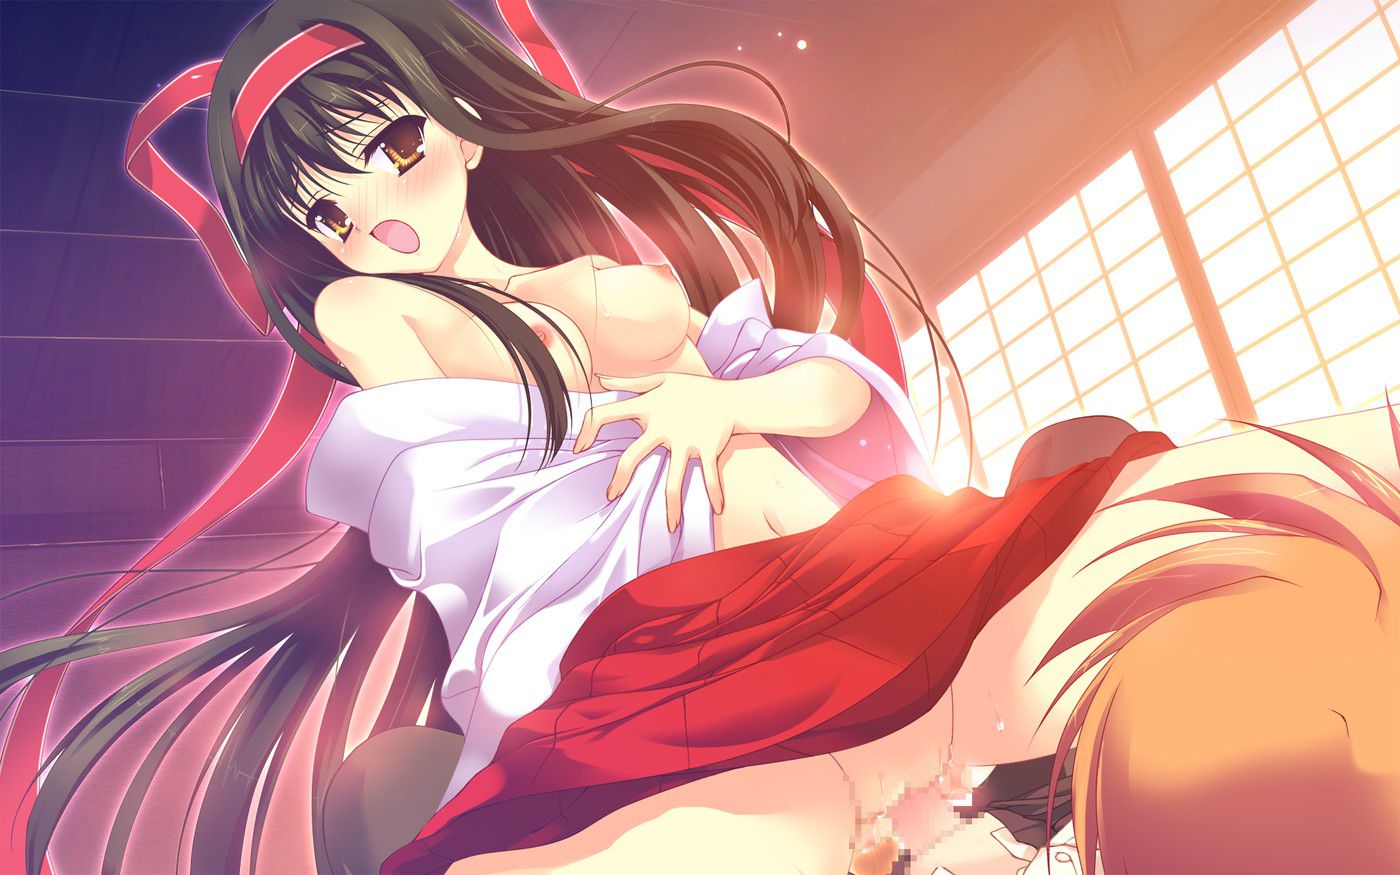 Secondary erotic erotic image that you can enjoy the lewd appearance of a cute girl in the appearance of a shrine maiden 26